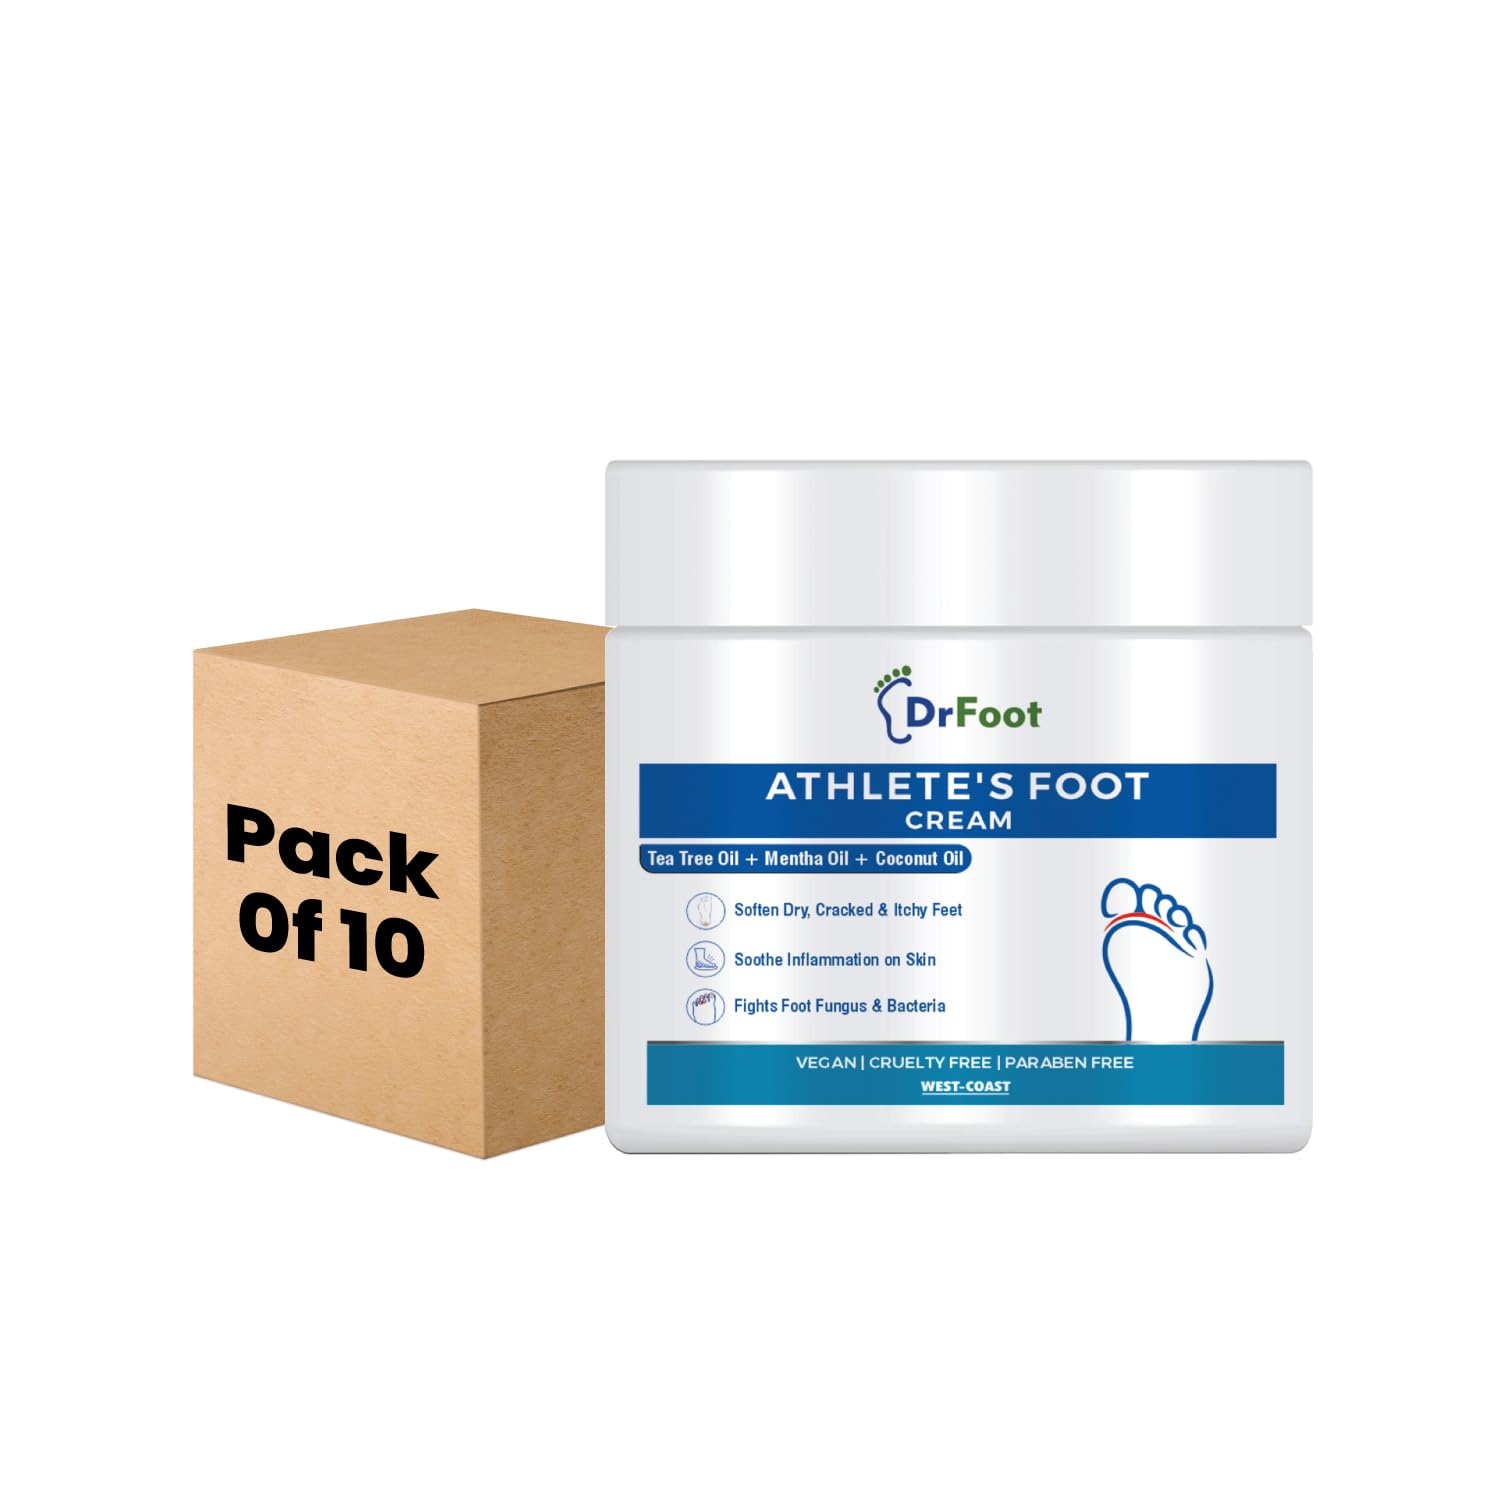 Dr Foot Athlete’s Foot Cream, Especially for the Athlete’s Feet, With the Goodness of Tea Tree Oil, Menthol Oil, Coconut Oil, Neem Oil, Apple Cider Vinegar, Vitamin E Oil - 100gm (Pack of 10)